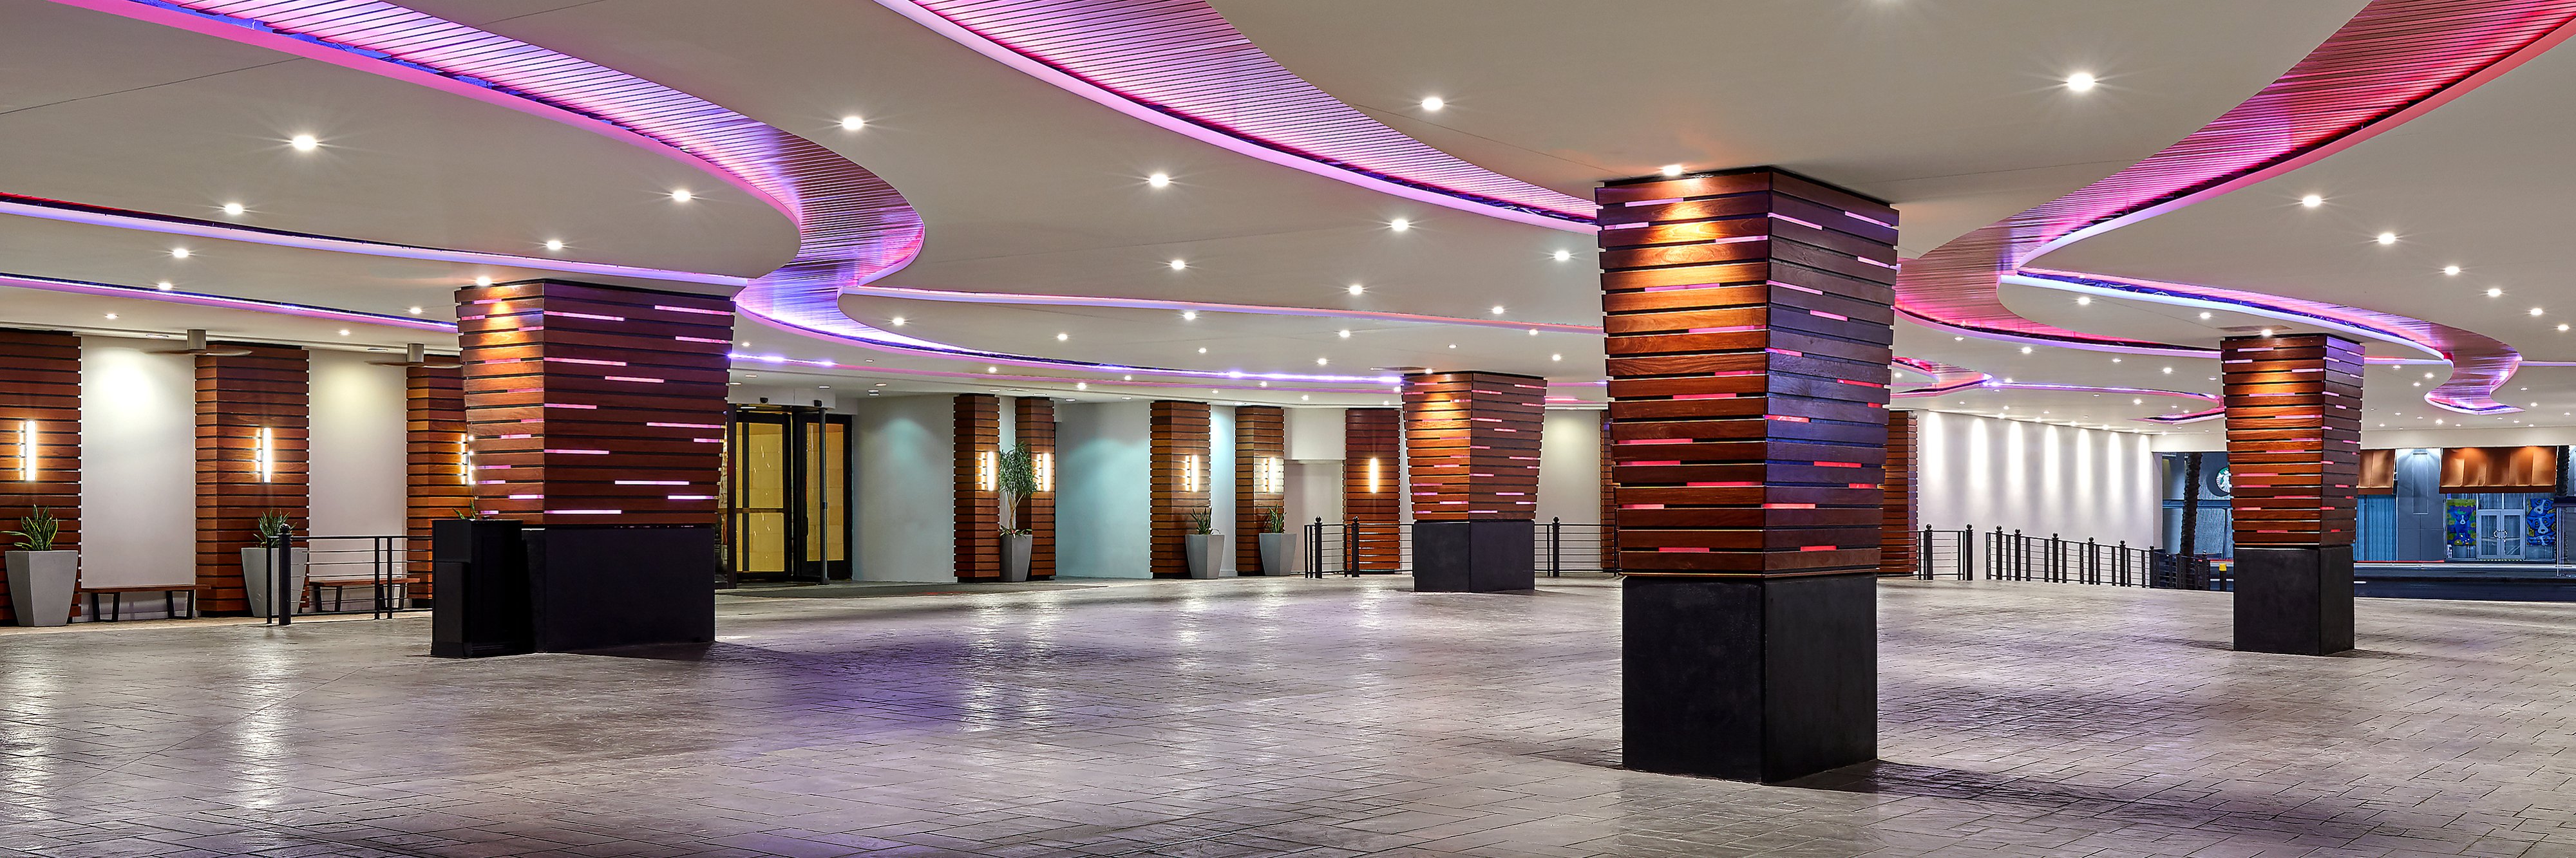 Hotel porte cochere with pink accent lighting